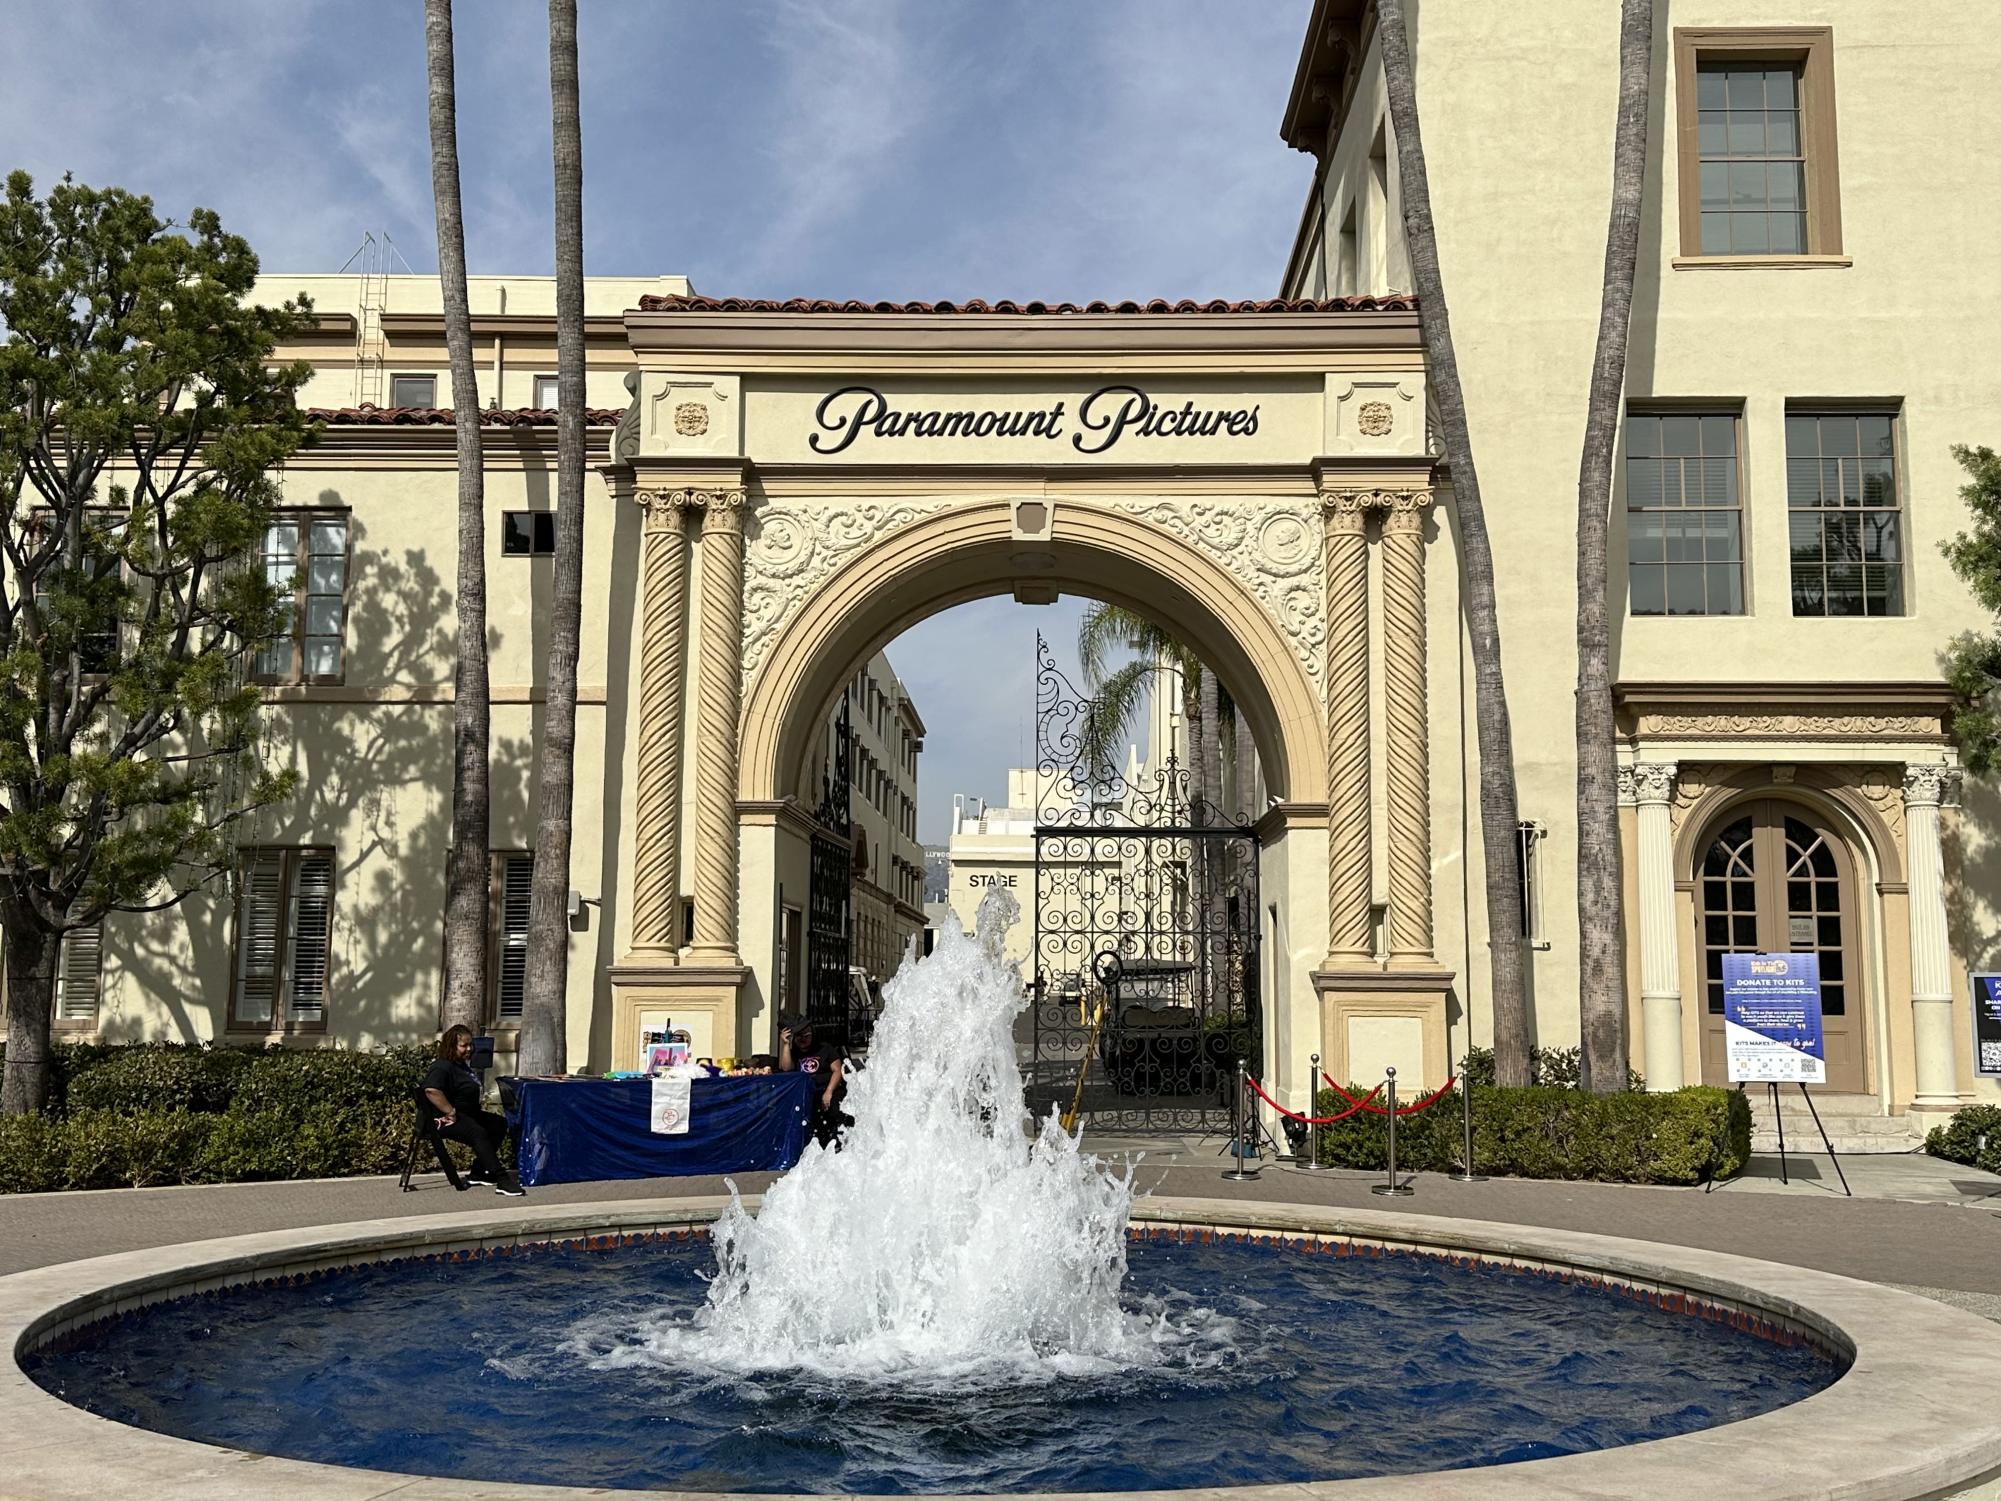 Kids in the Spotlight gave their movie makers the chance to be at the center of the universe for the day as they watched their movies up on the big screen at Paramount Picture Studios.